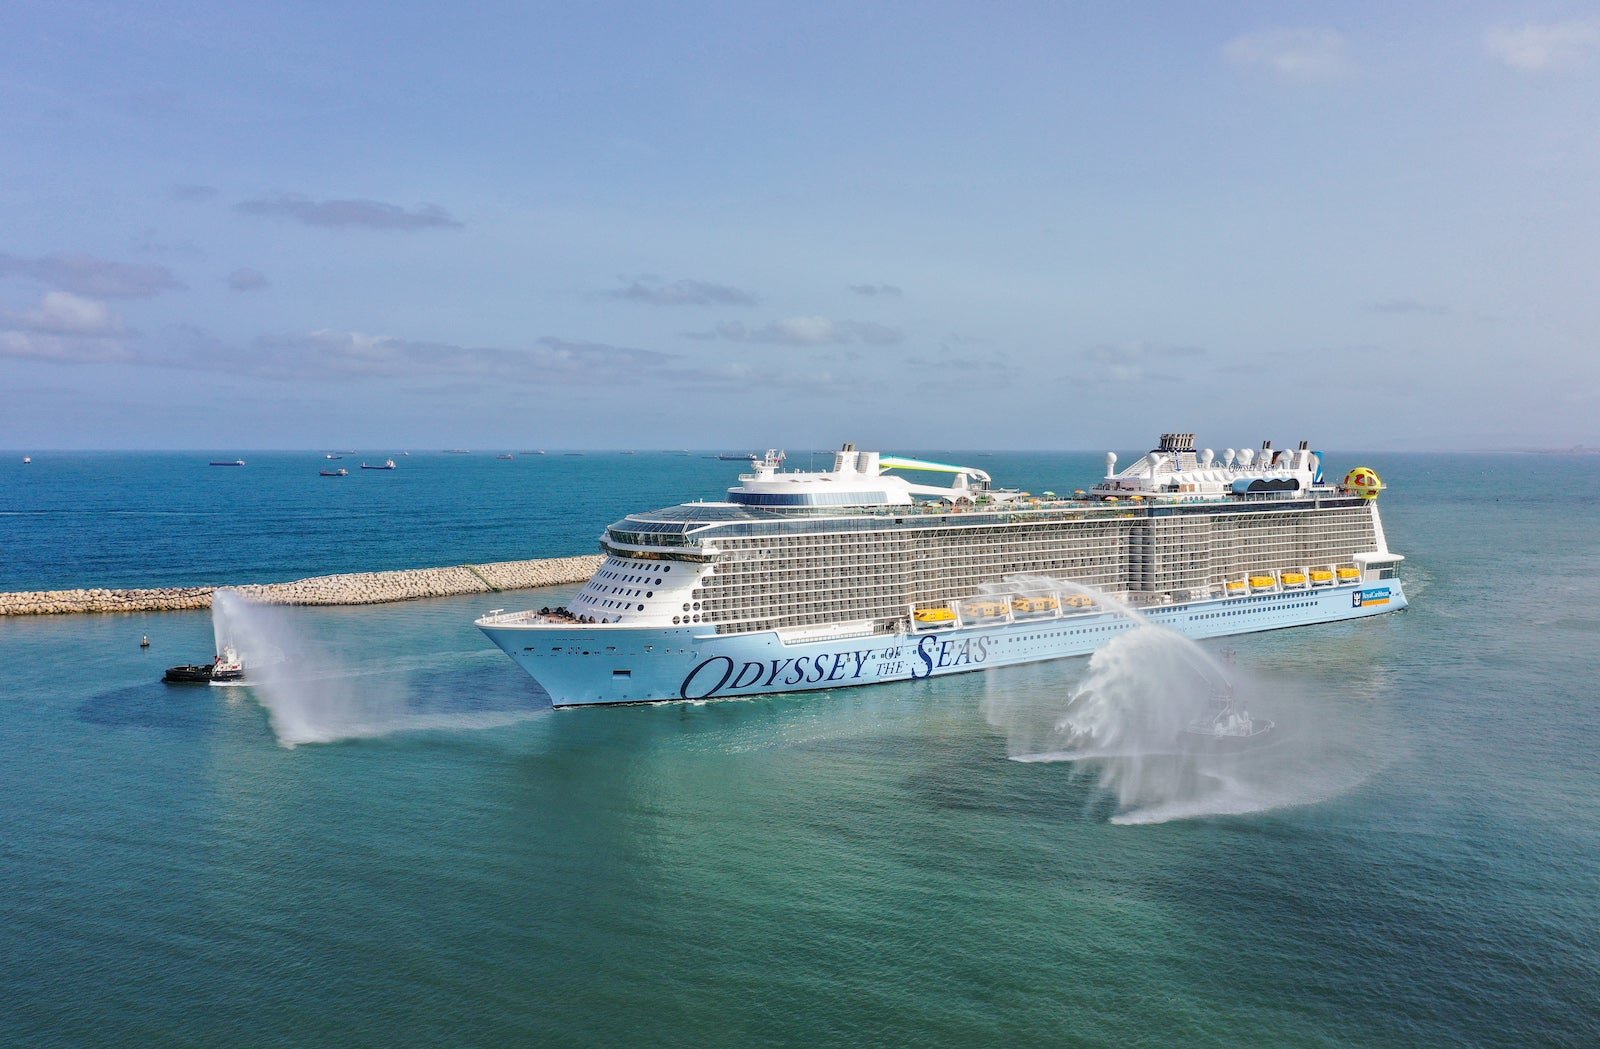 Cruise line CEOs: Challenges for industry remain, but ‘future is bright’ for cruising